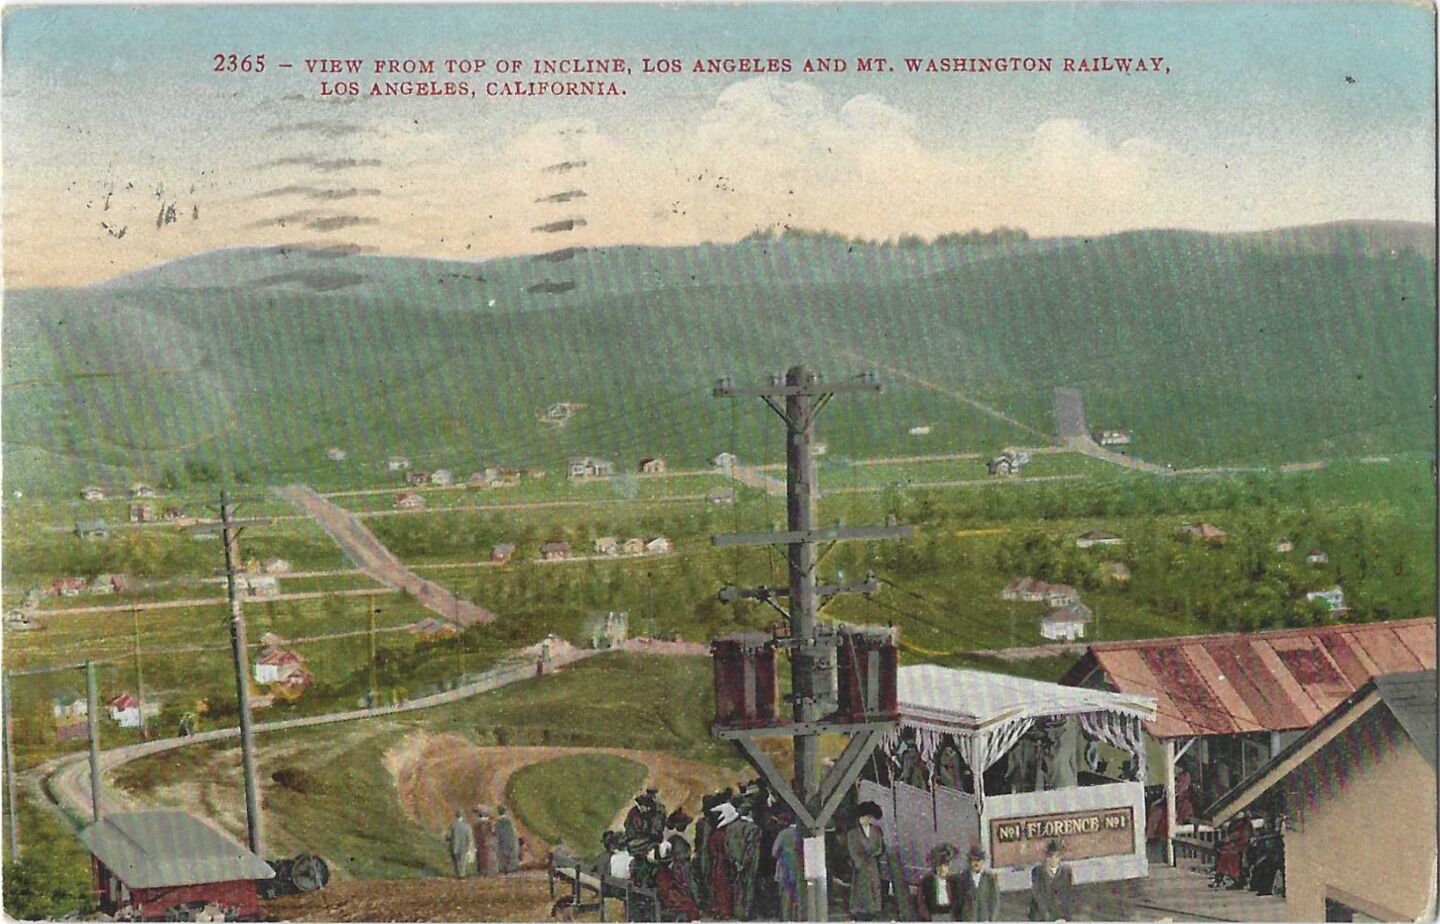 From the top of the Mount Washington rail incline, passengers could see the hills and city below. The cars were said to stop wherever residents wanted to alight.